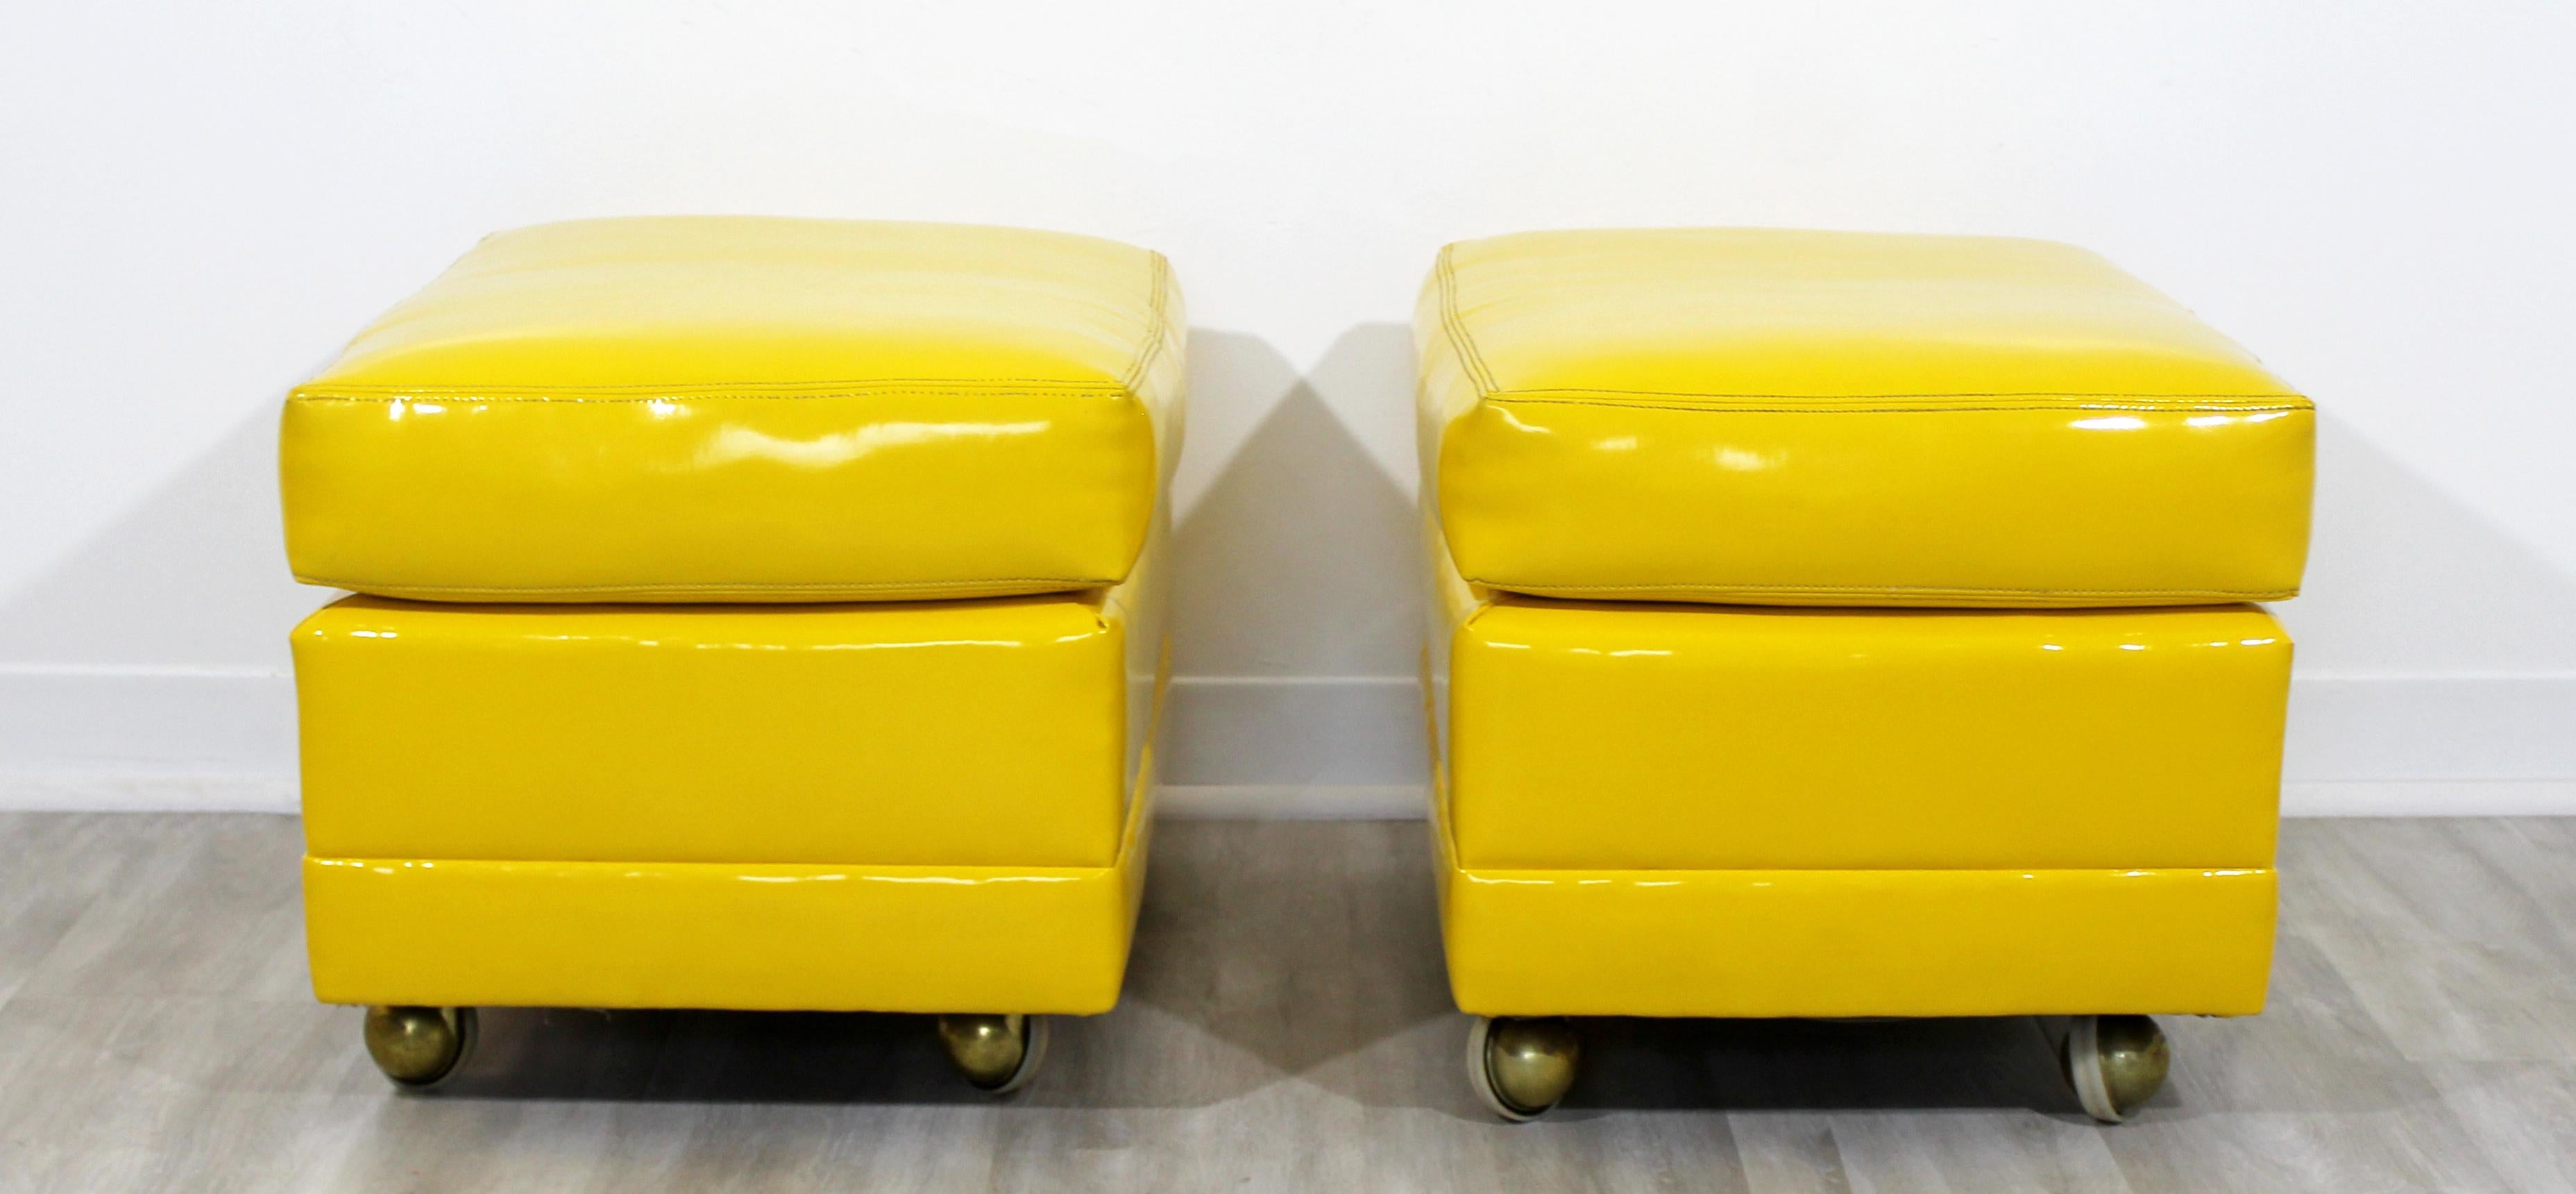 Late 20th Century Mid-Century Modern Pair of Yellow Vinyl Stools Benches Seats Ottomans Casters